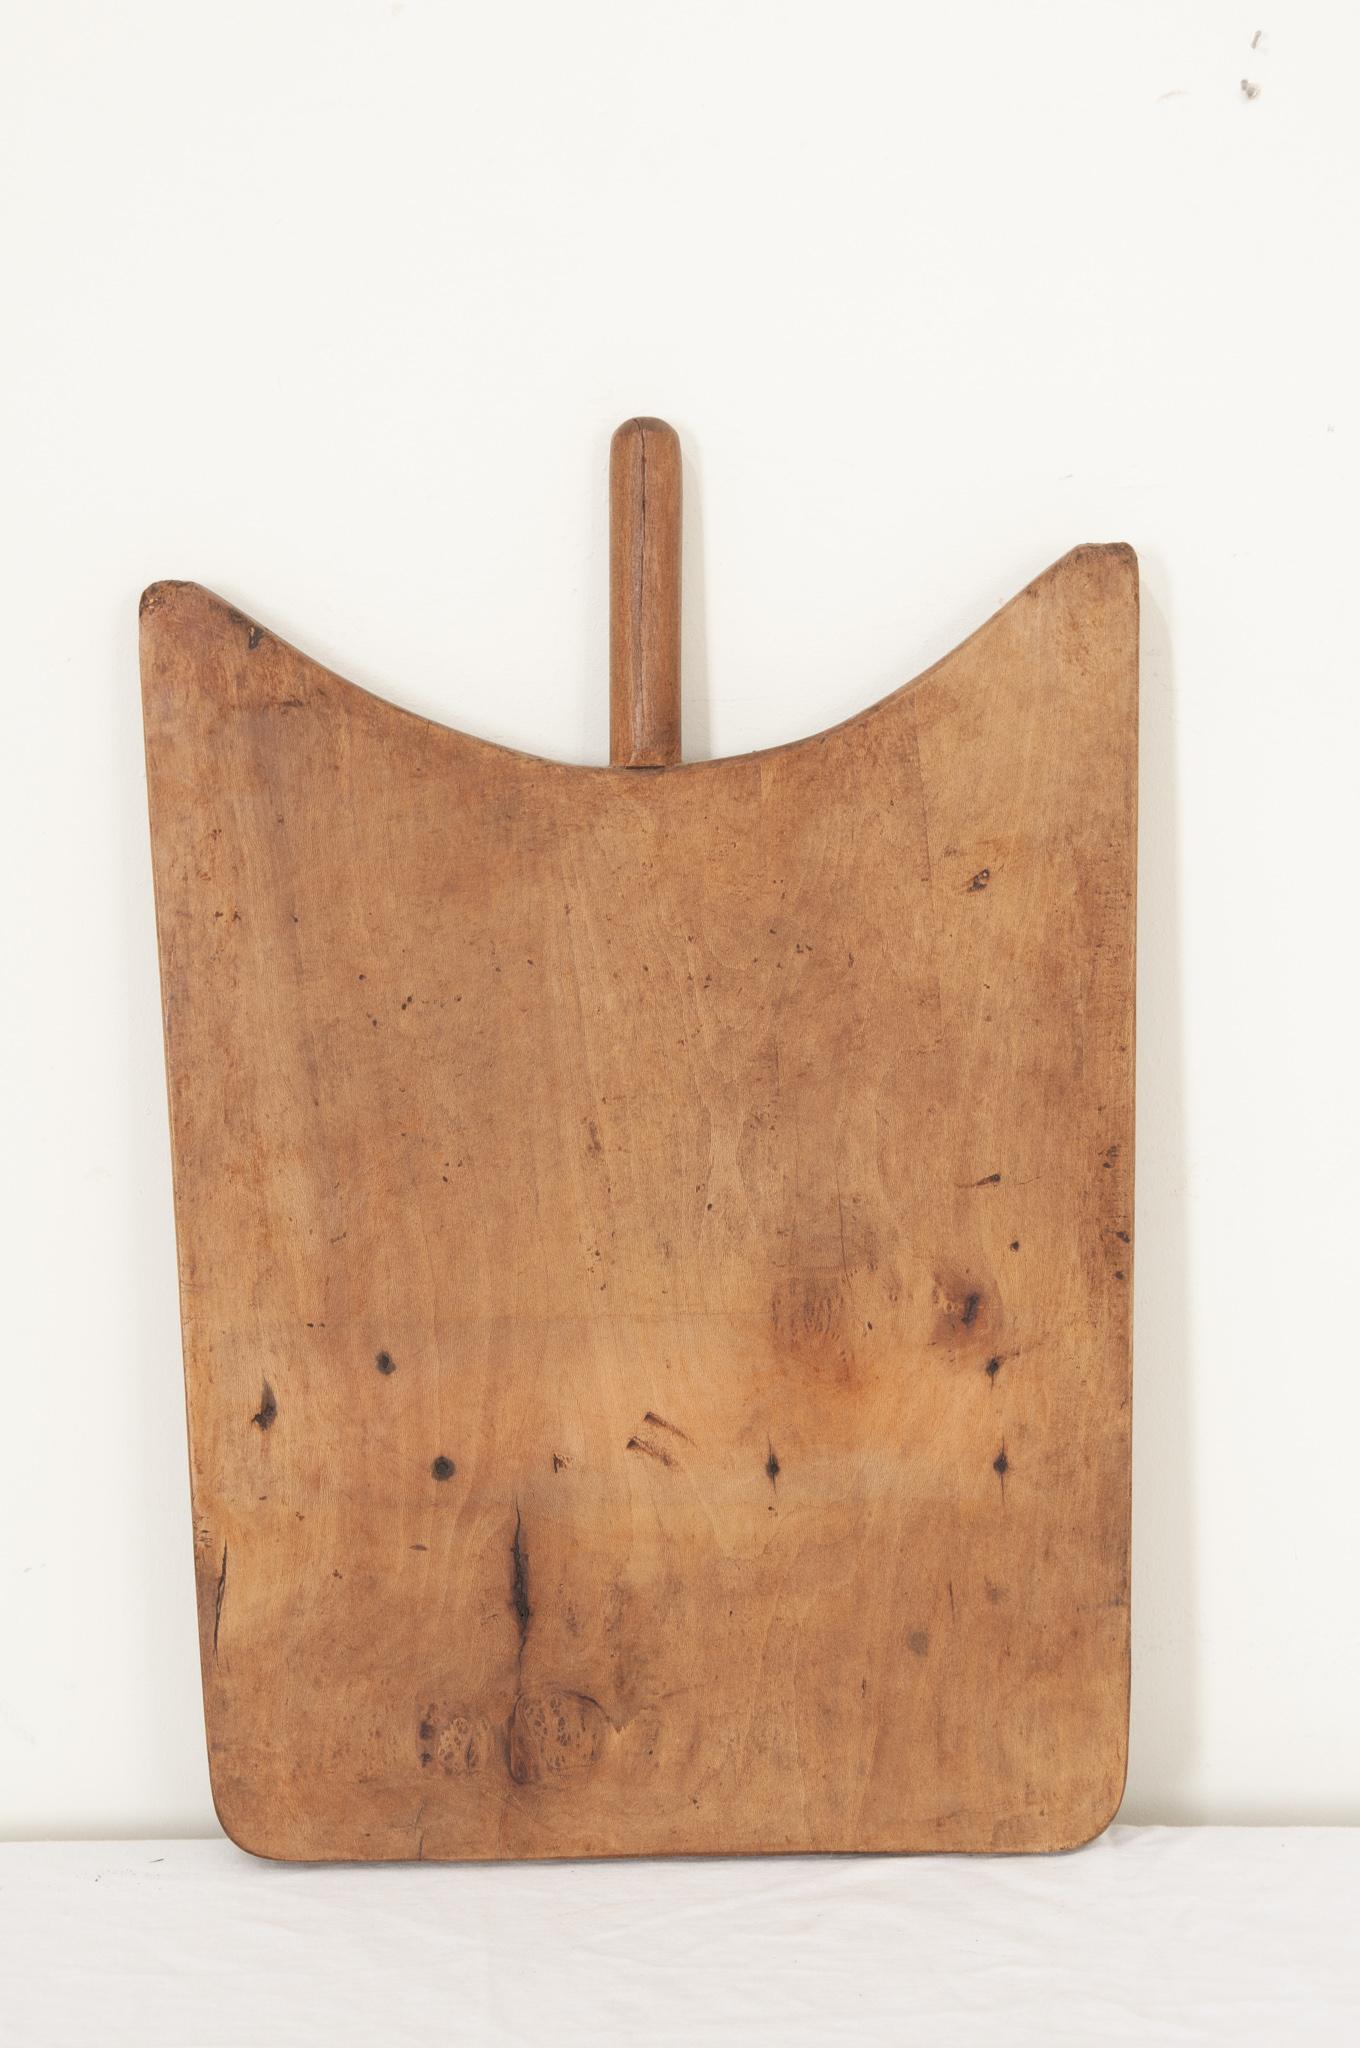 A large single plank wood cutting board from France in an interesting shape with smooth corners and a handle. Knife marks and scrapes that were left by cooks, now long gone, can be seen and felt as if they were made yesterday. A nice antique, full